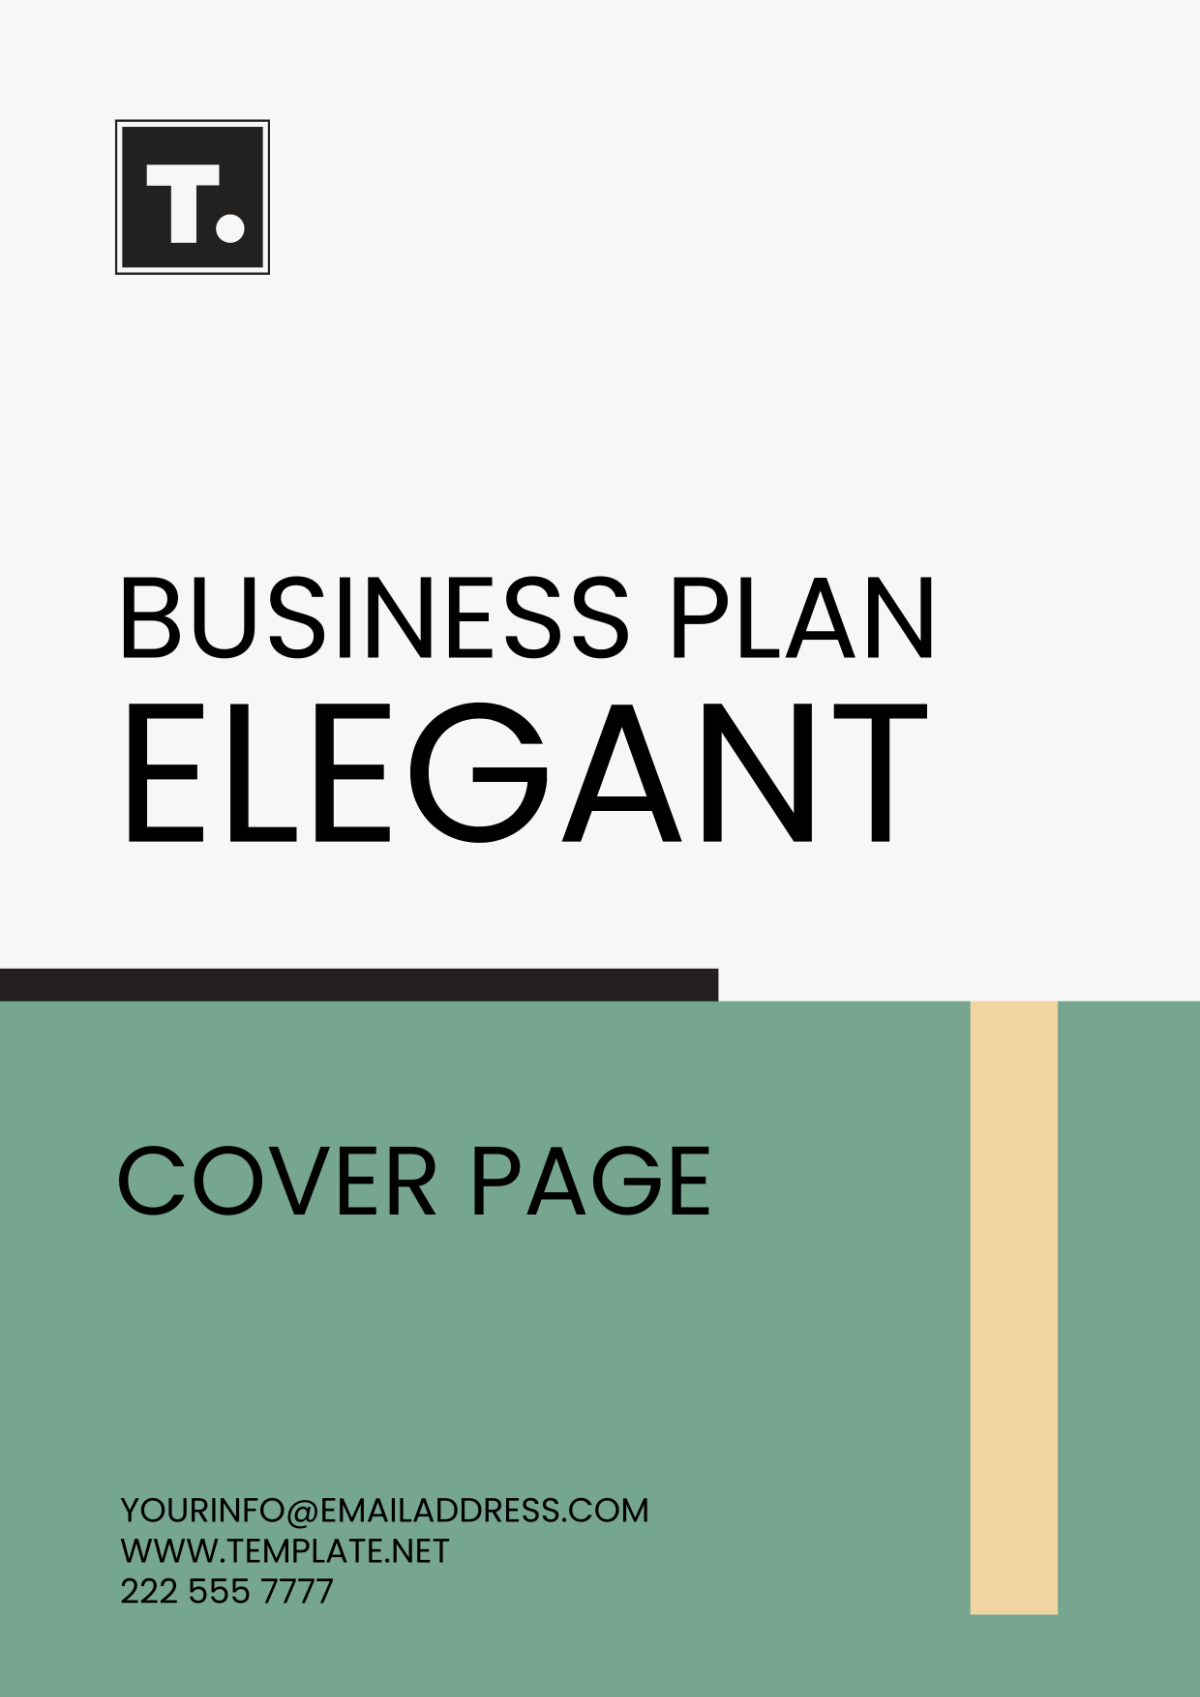 Free Business Plan Elegant Cover Page Template